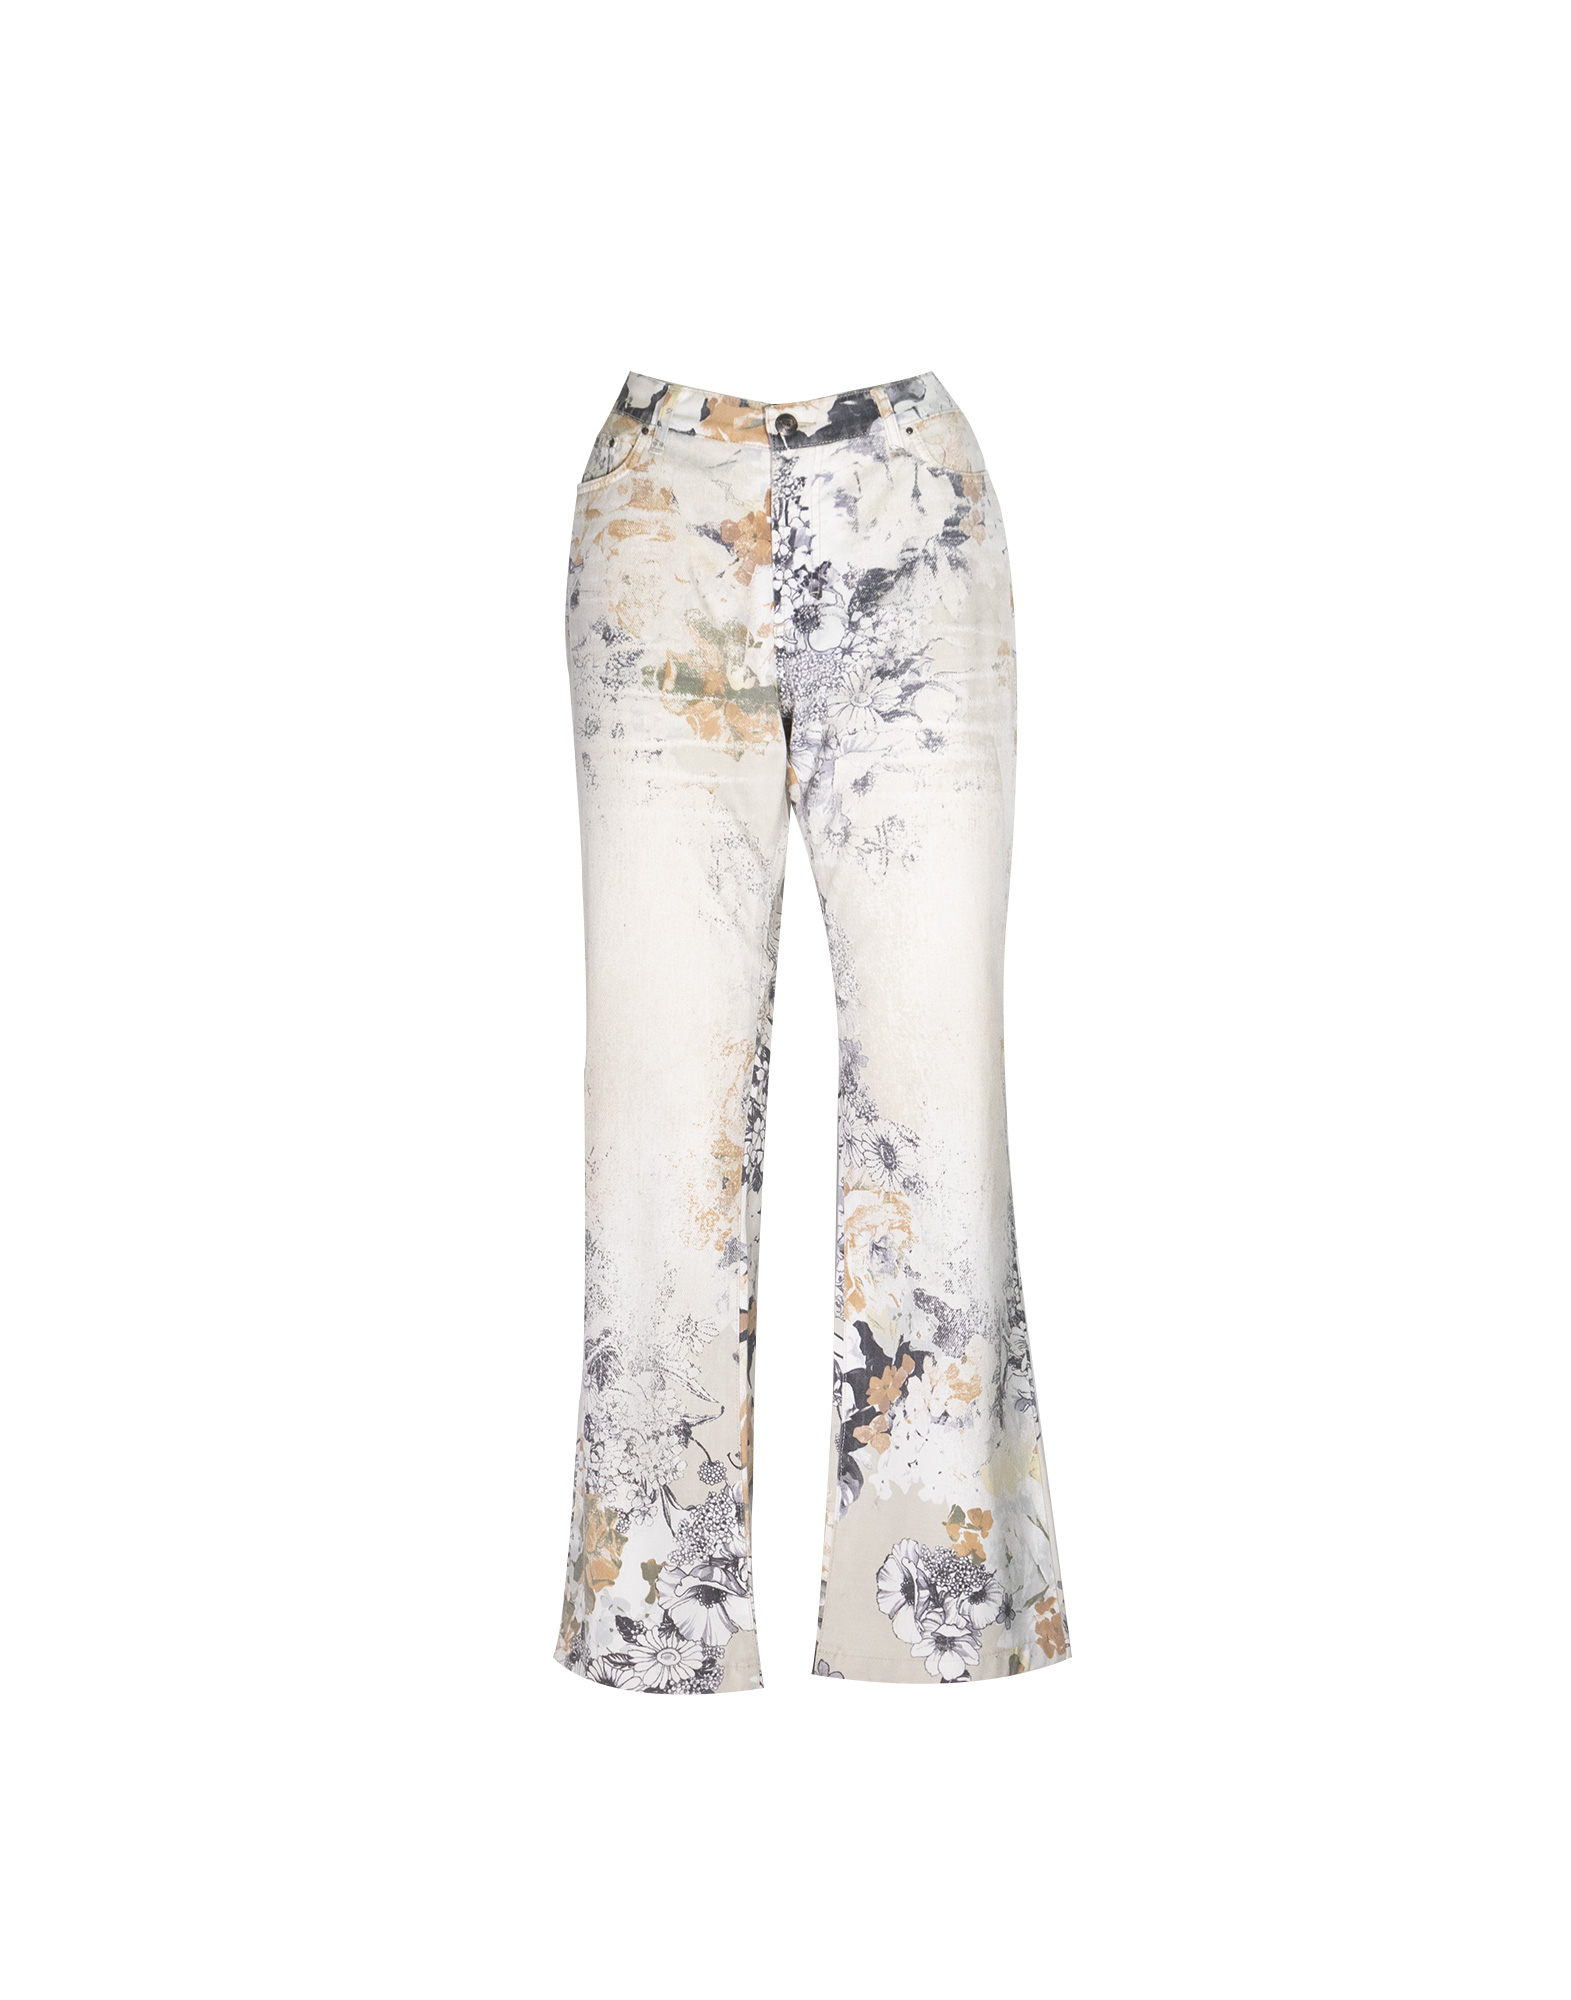 Just Cavalli - Floral patterned flare trousers